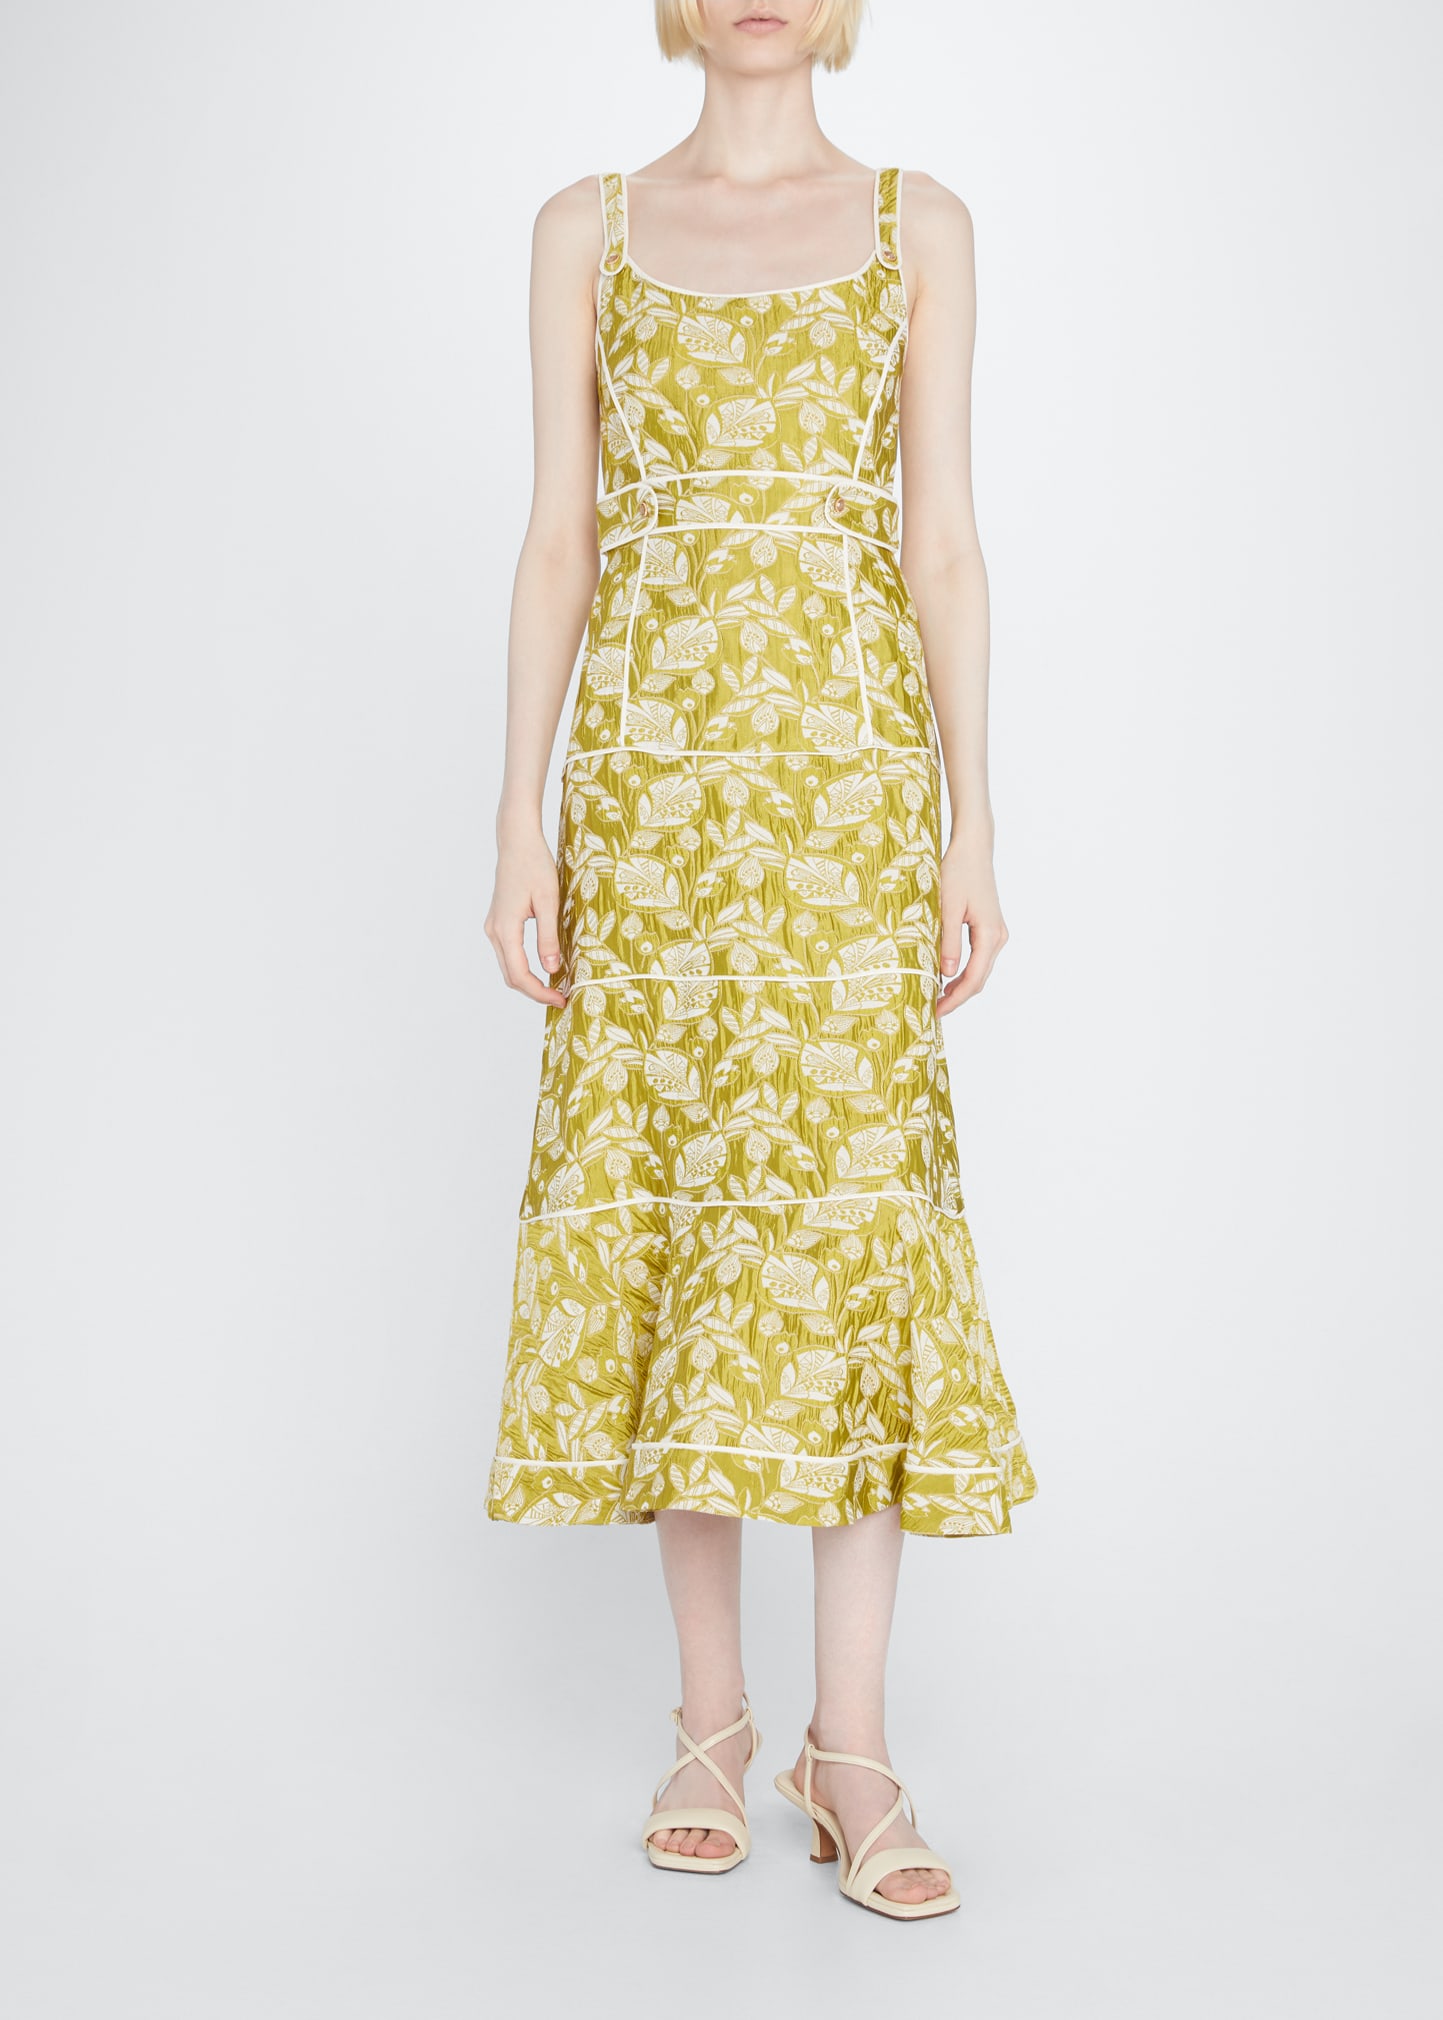 Alexis Bond Tiered Floral Jacquard Midi Dress In Paille | ModeSens